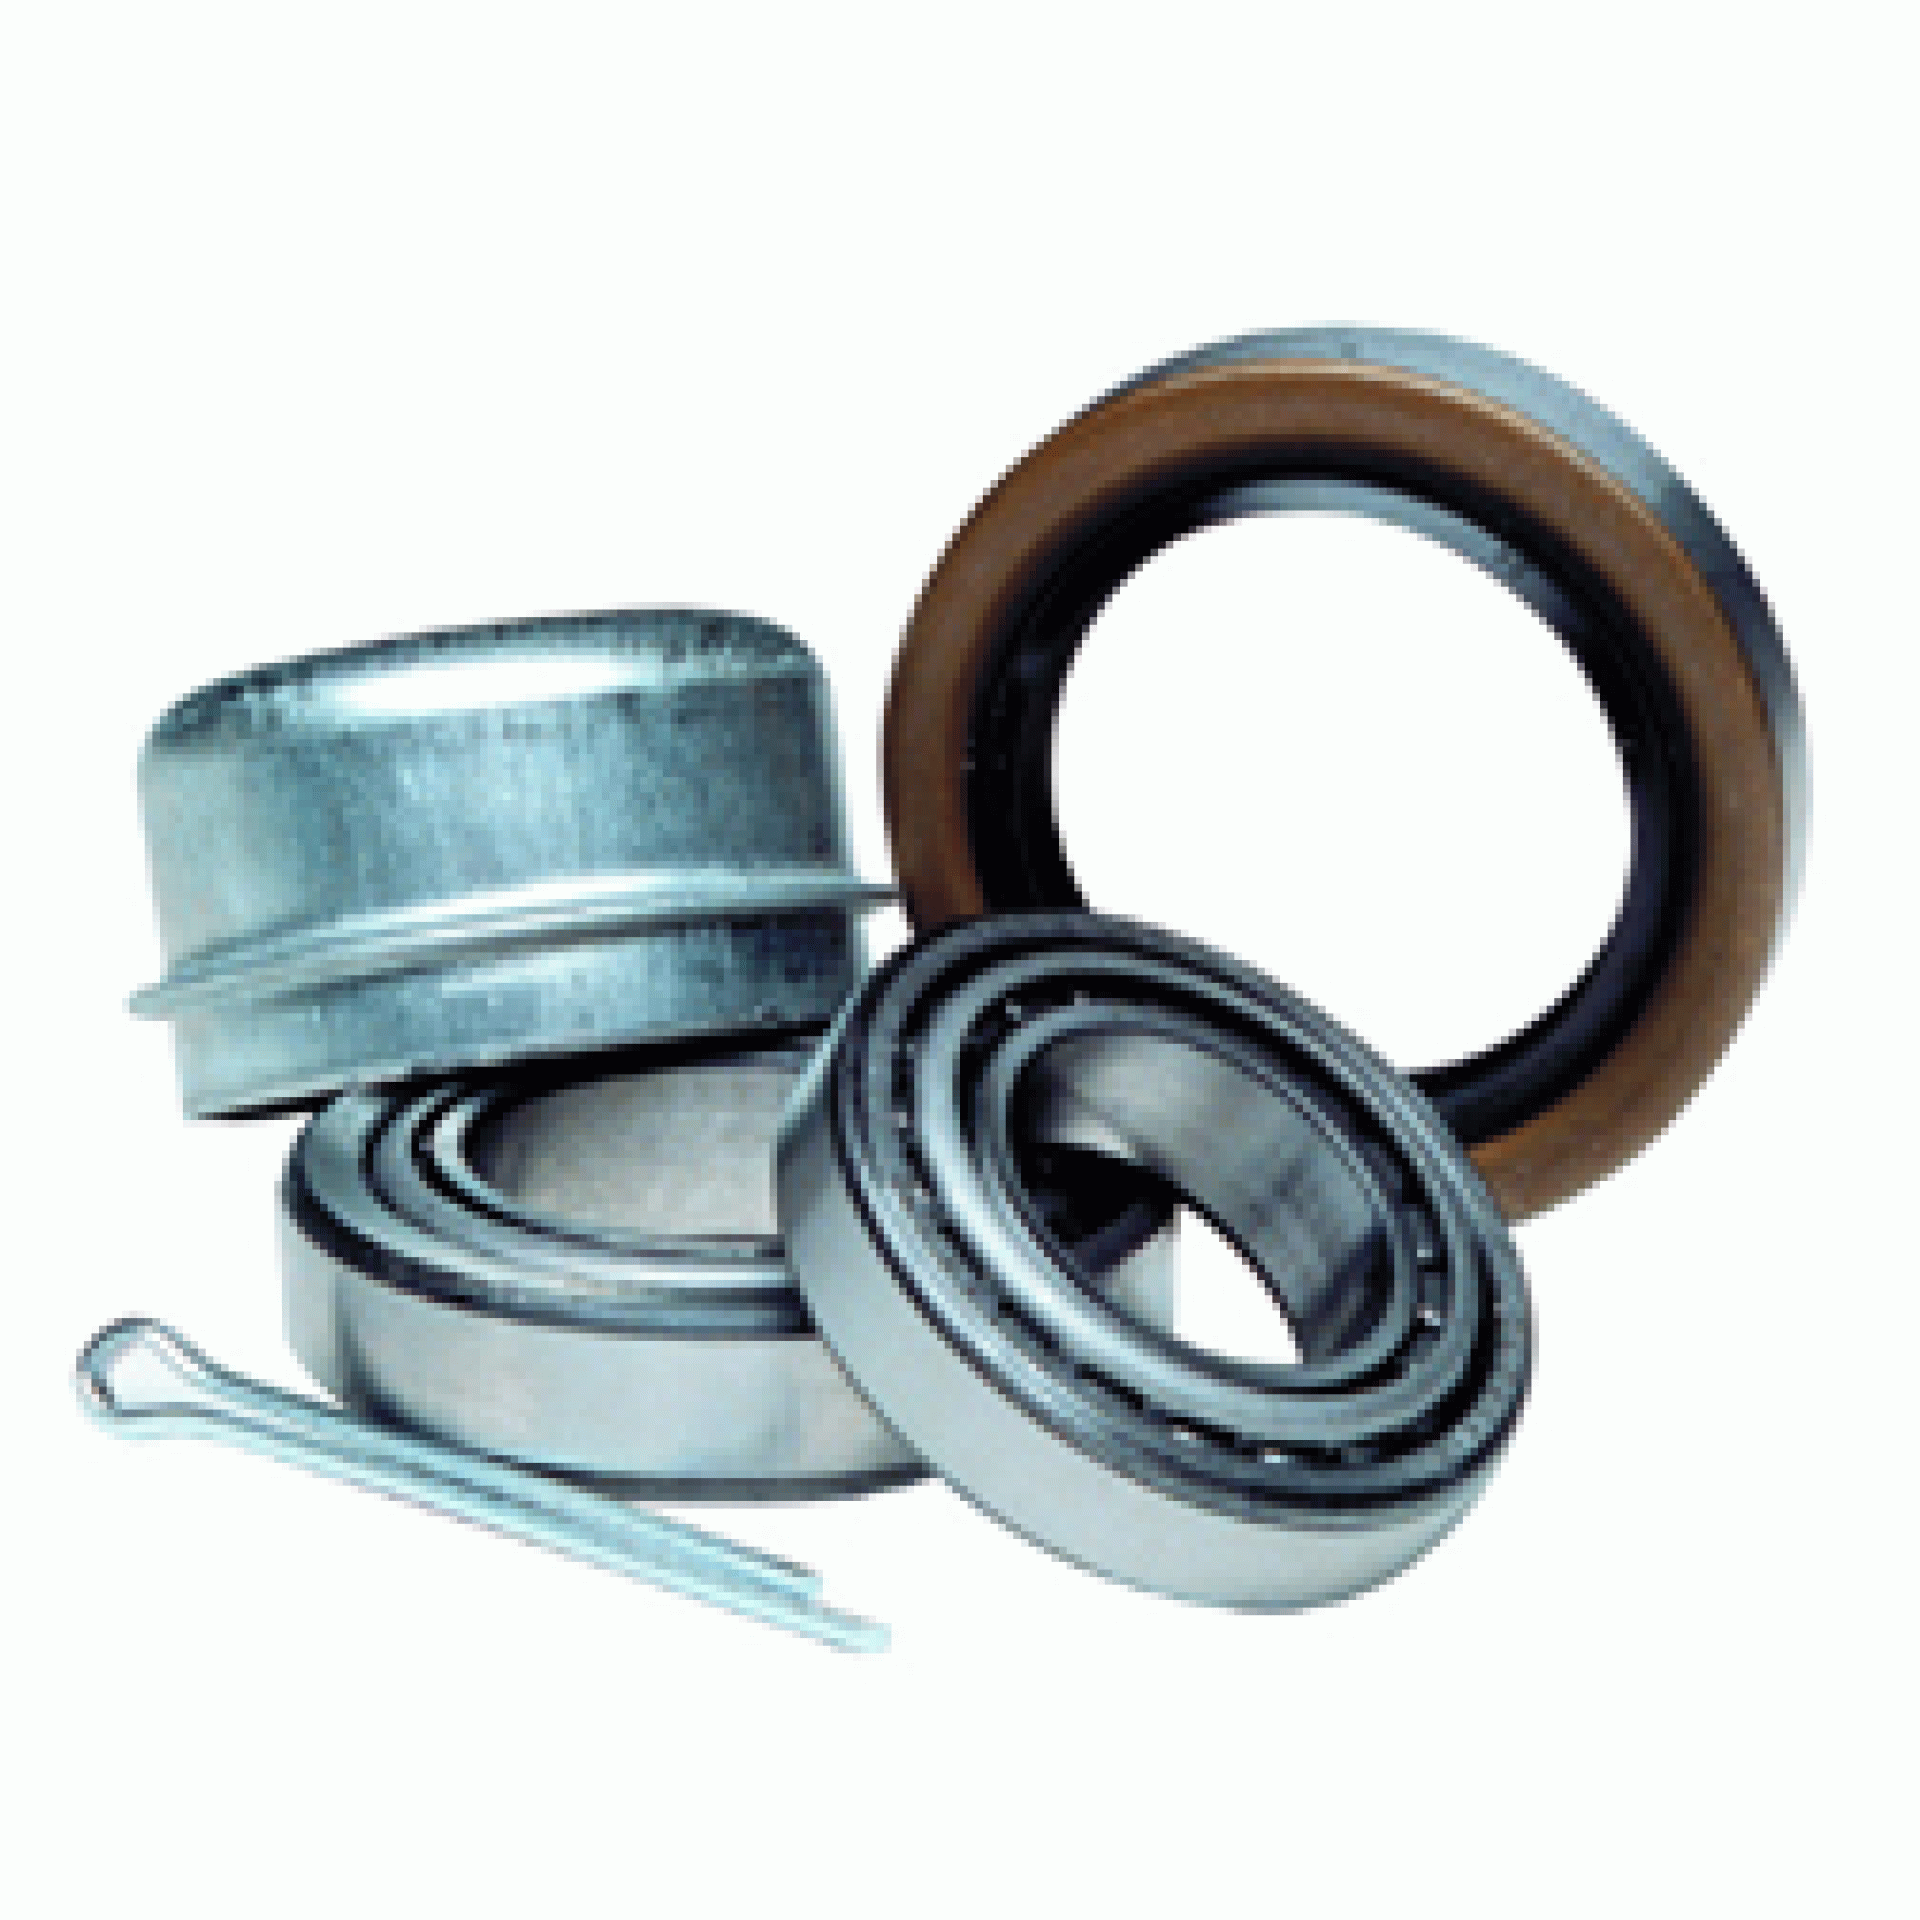 DEXTER MARINE PRODUCTS OF GEORGIA LC | K71-G02-44 | BEARING KIT- 1" STRAIGHT SPINDLE W/ DUST CAP L44643 CONE L44610 CUP